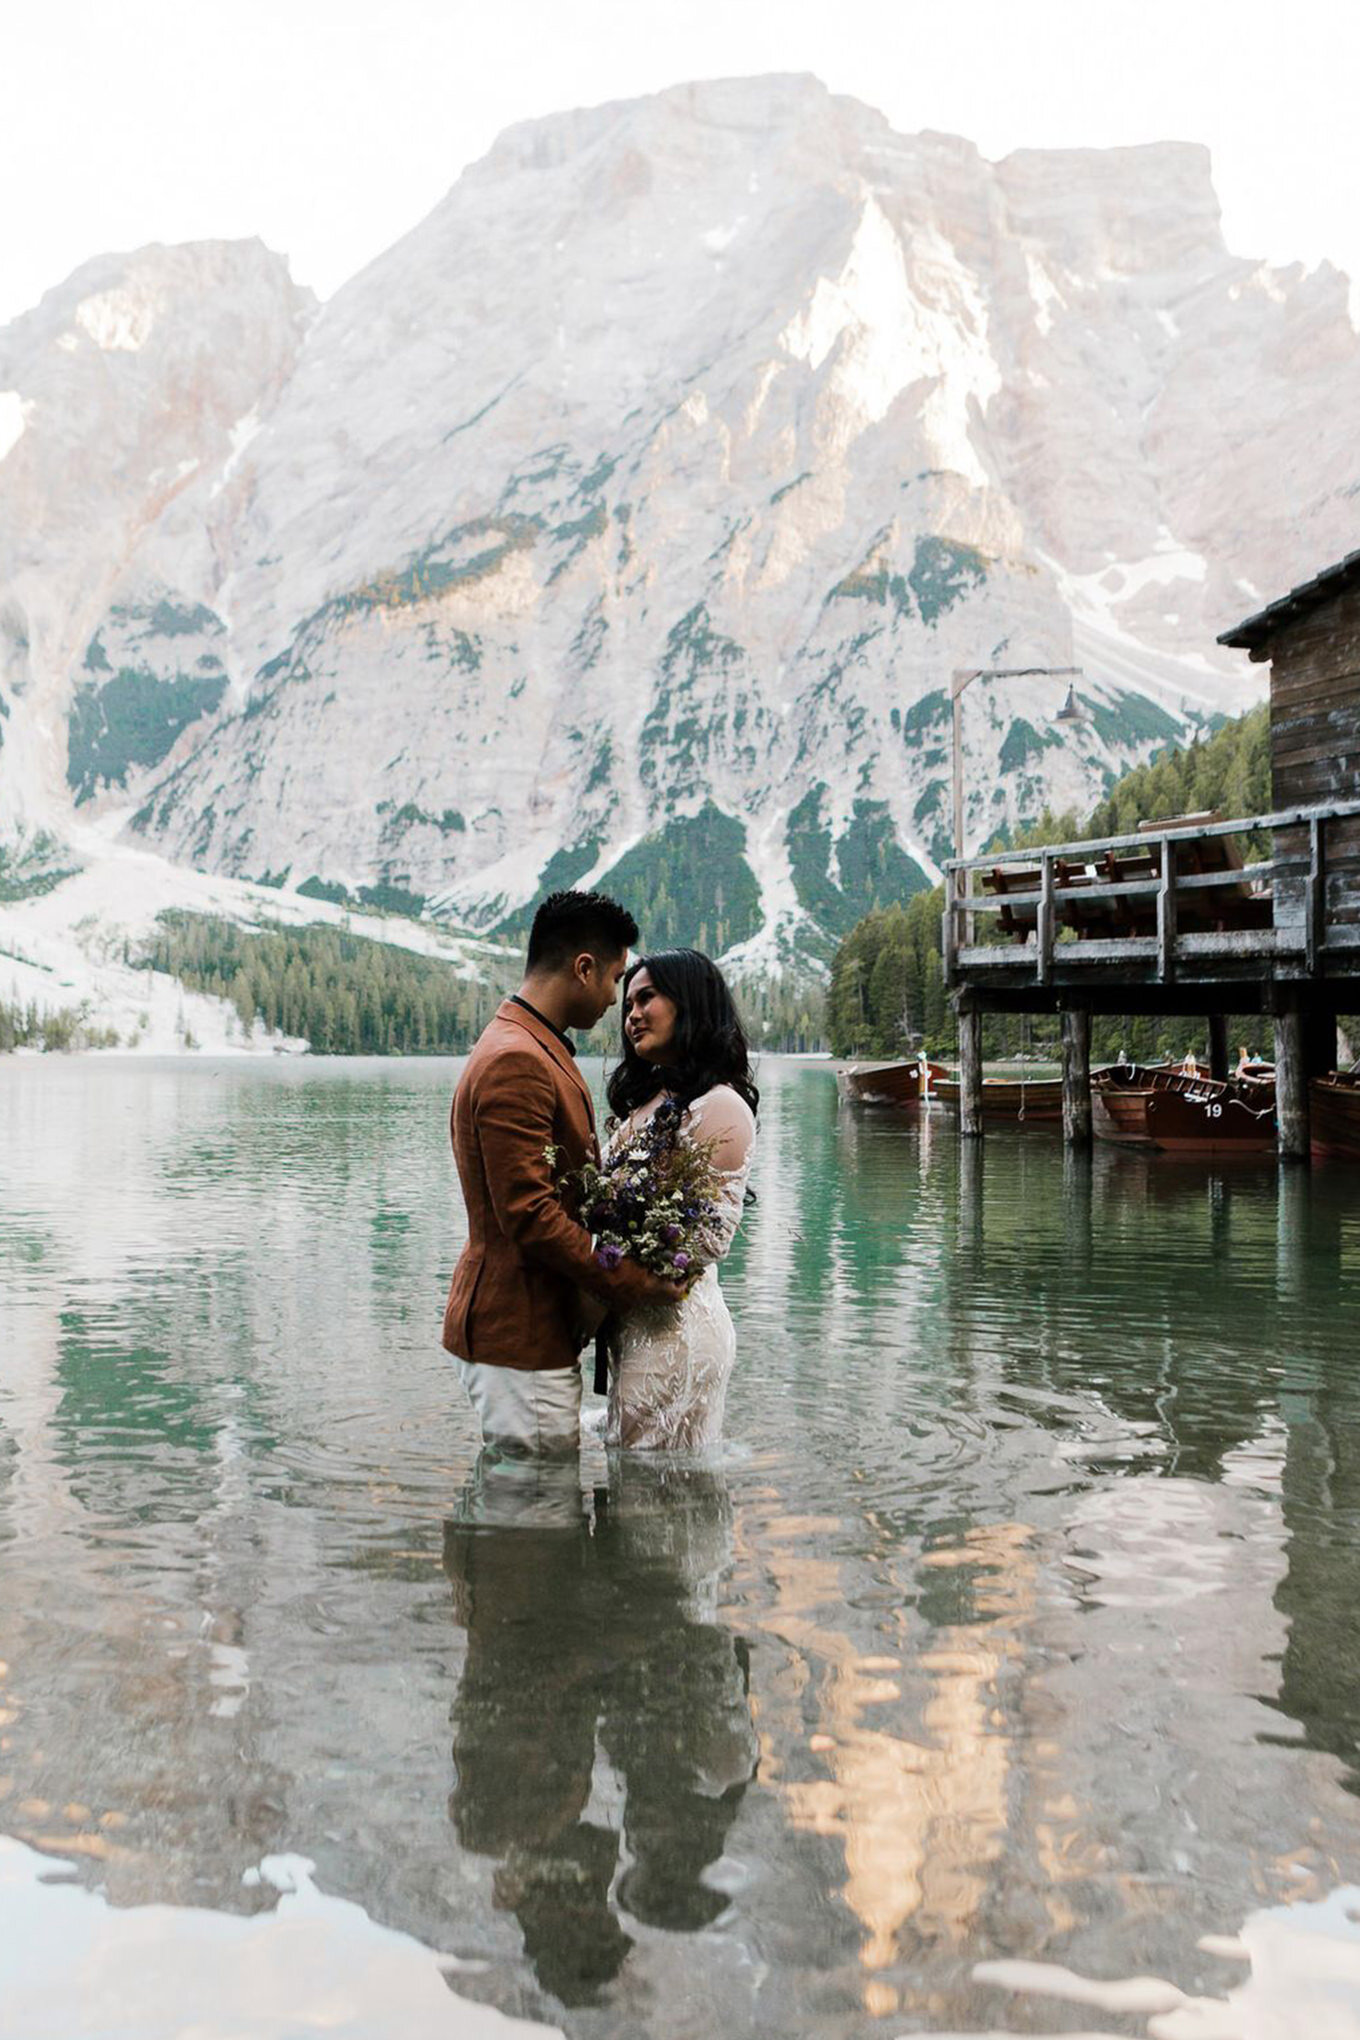 7fotomagoria_pre-wedding-shoot-of-indonesian-couple-in-tre-cime-mountains-and-lago-di-braies-the-most-beautiful-lake-of-dolomites-in-italy1570527395_32 copy.jpg